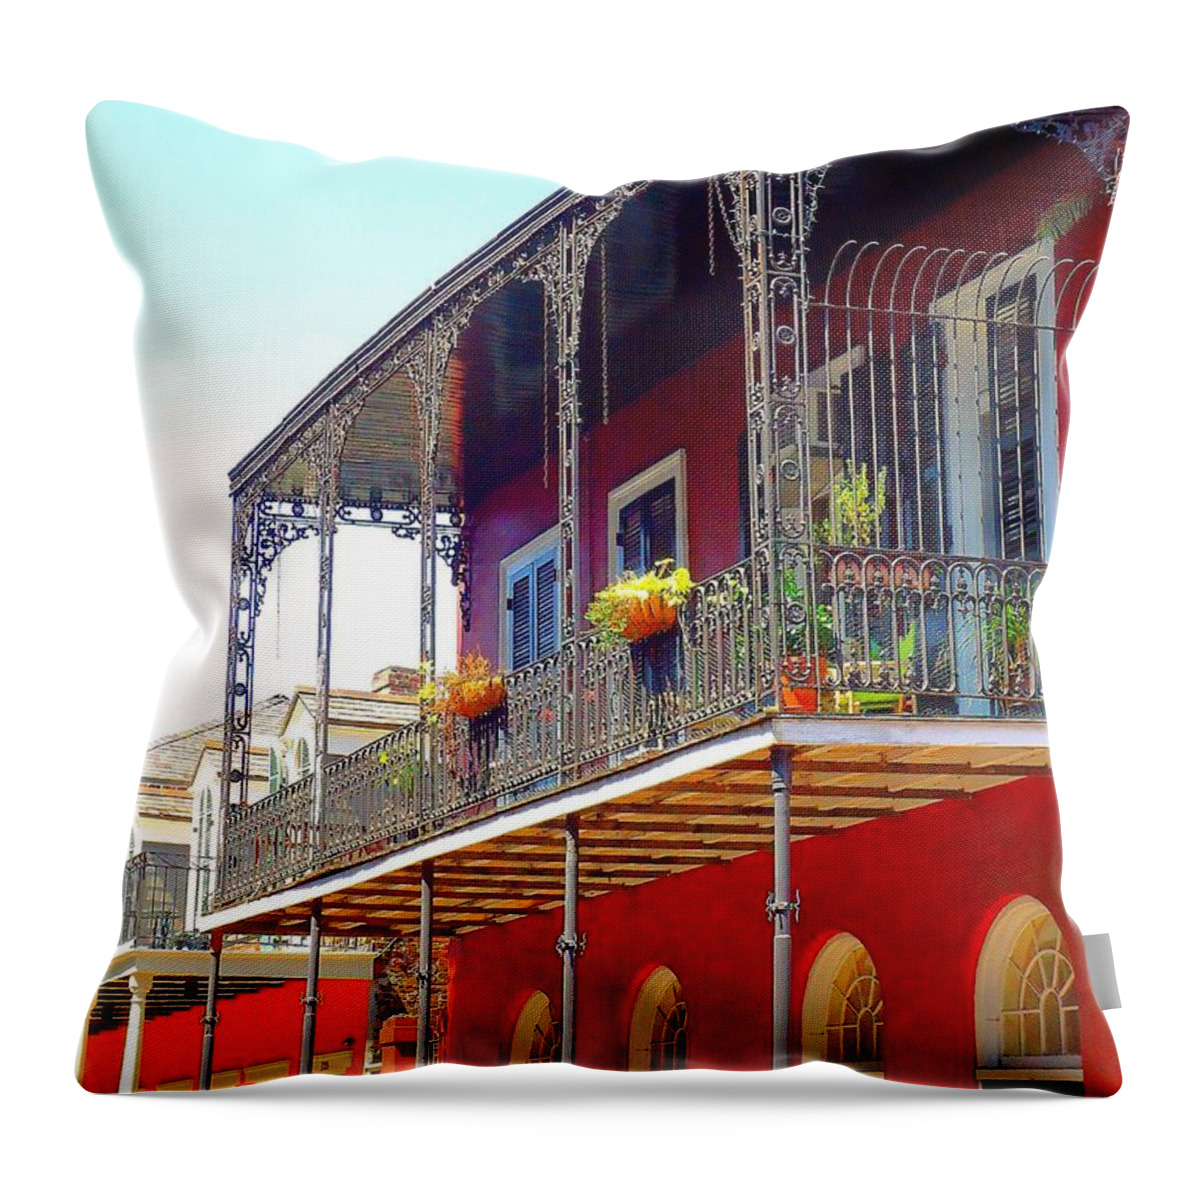 New Orleans Throw Pillow featuring the photograph New Orleans French Quarter Architecture 2 by Saundra Myles